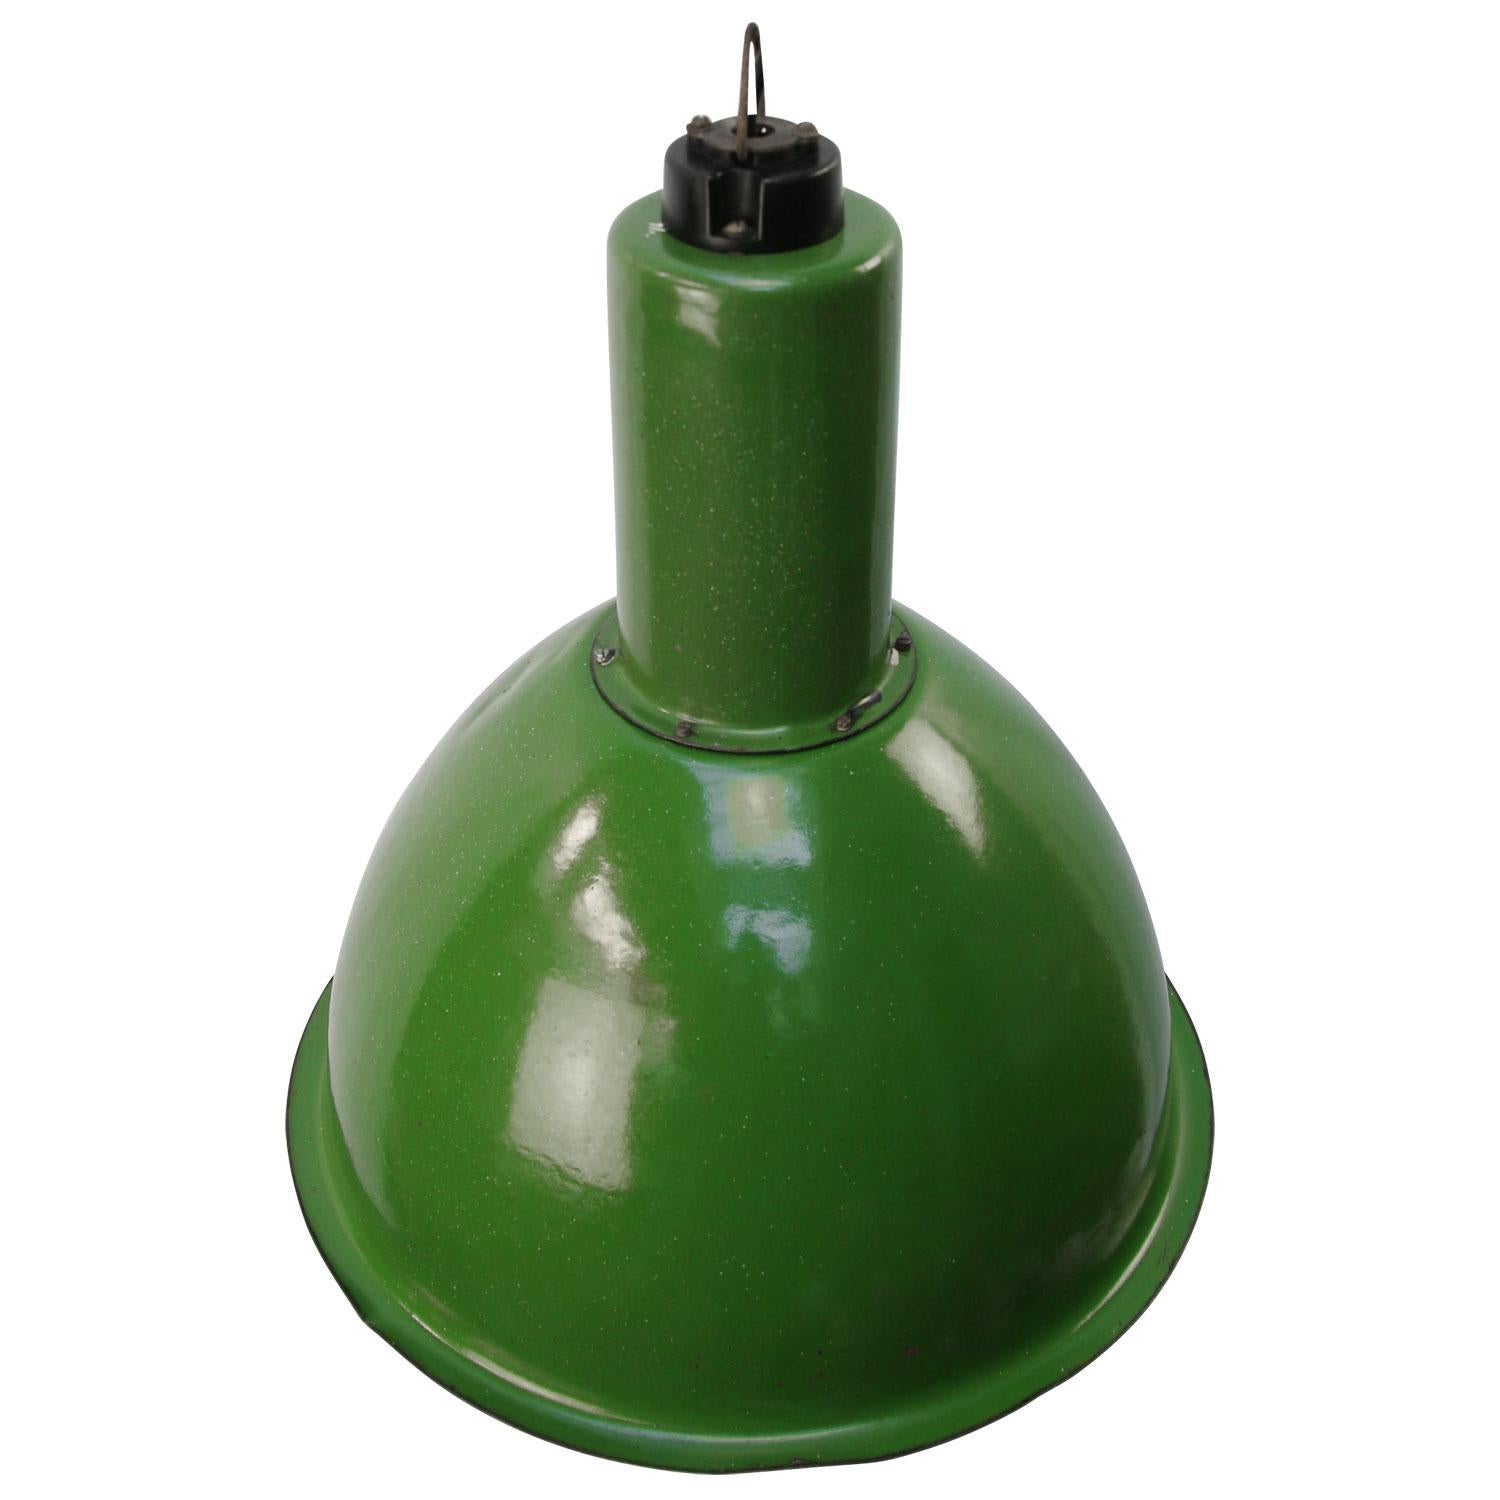 Enamel industrial pendant
green enamel shade, white inside.
Green enamel top.

Weight: 3.40 kg / 7.5 lb

Priced per individual item. All lamps have been made suitable by international standards for incandescent light bulbs, energy-efficient